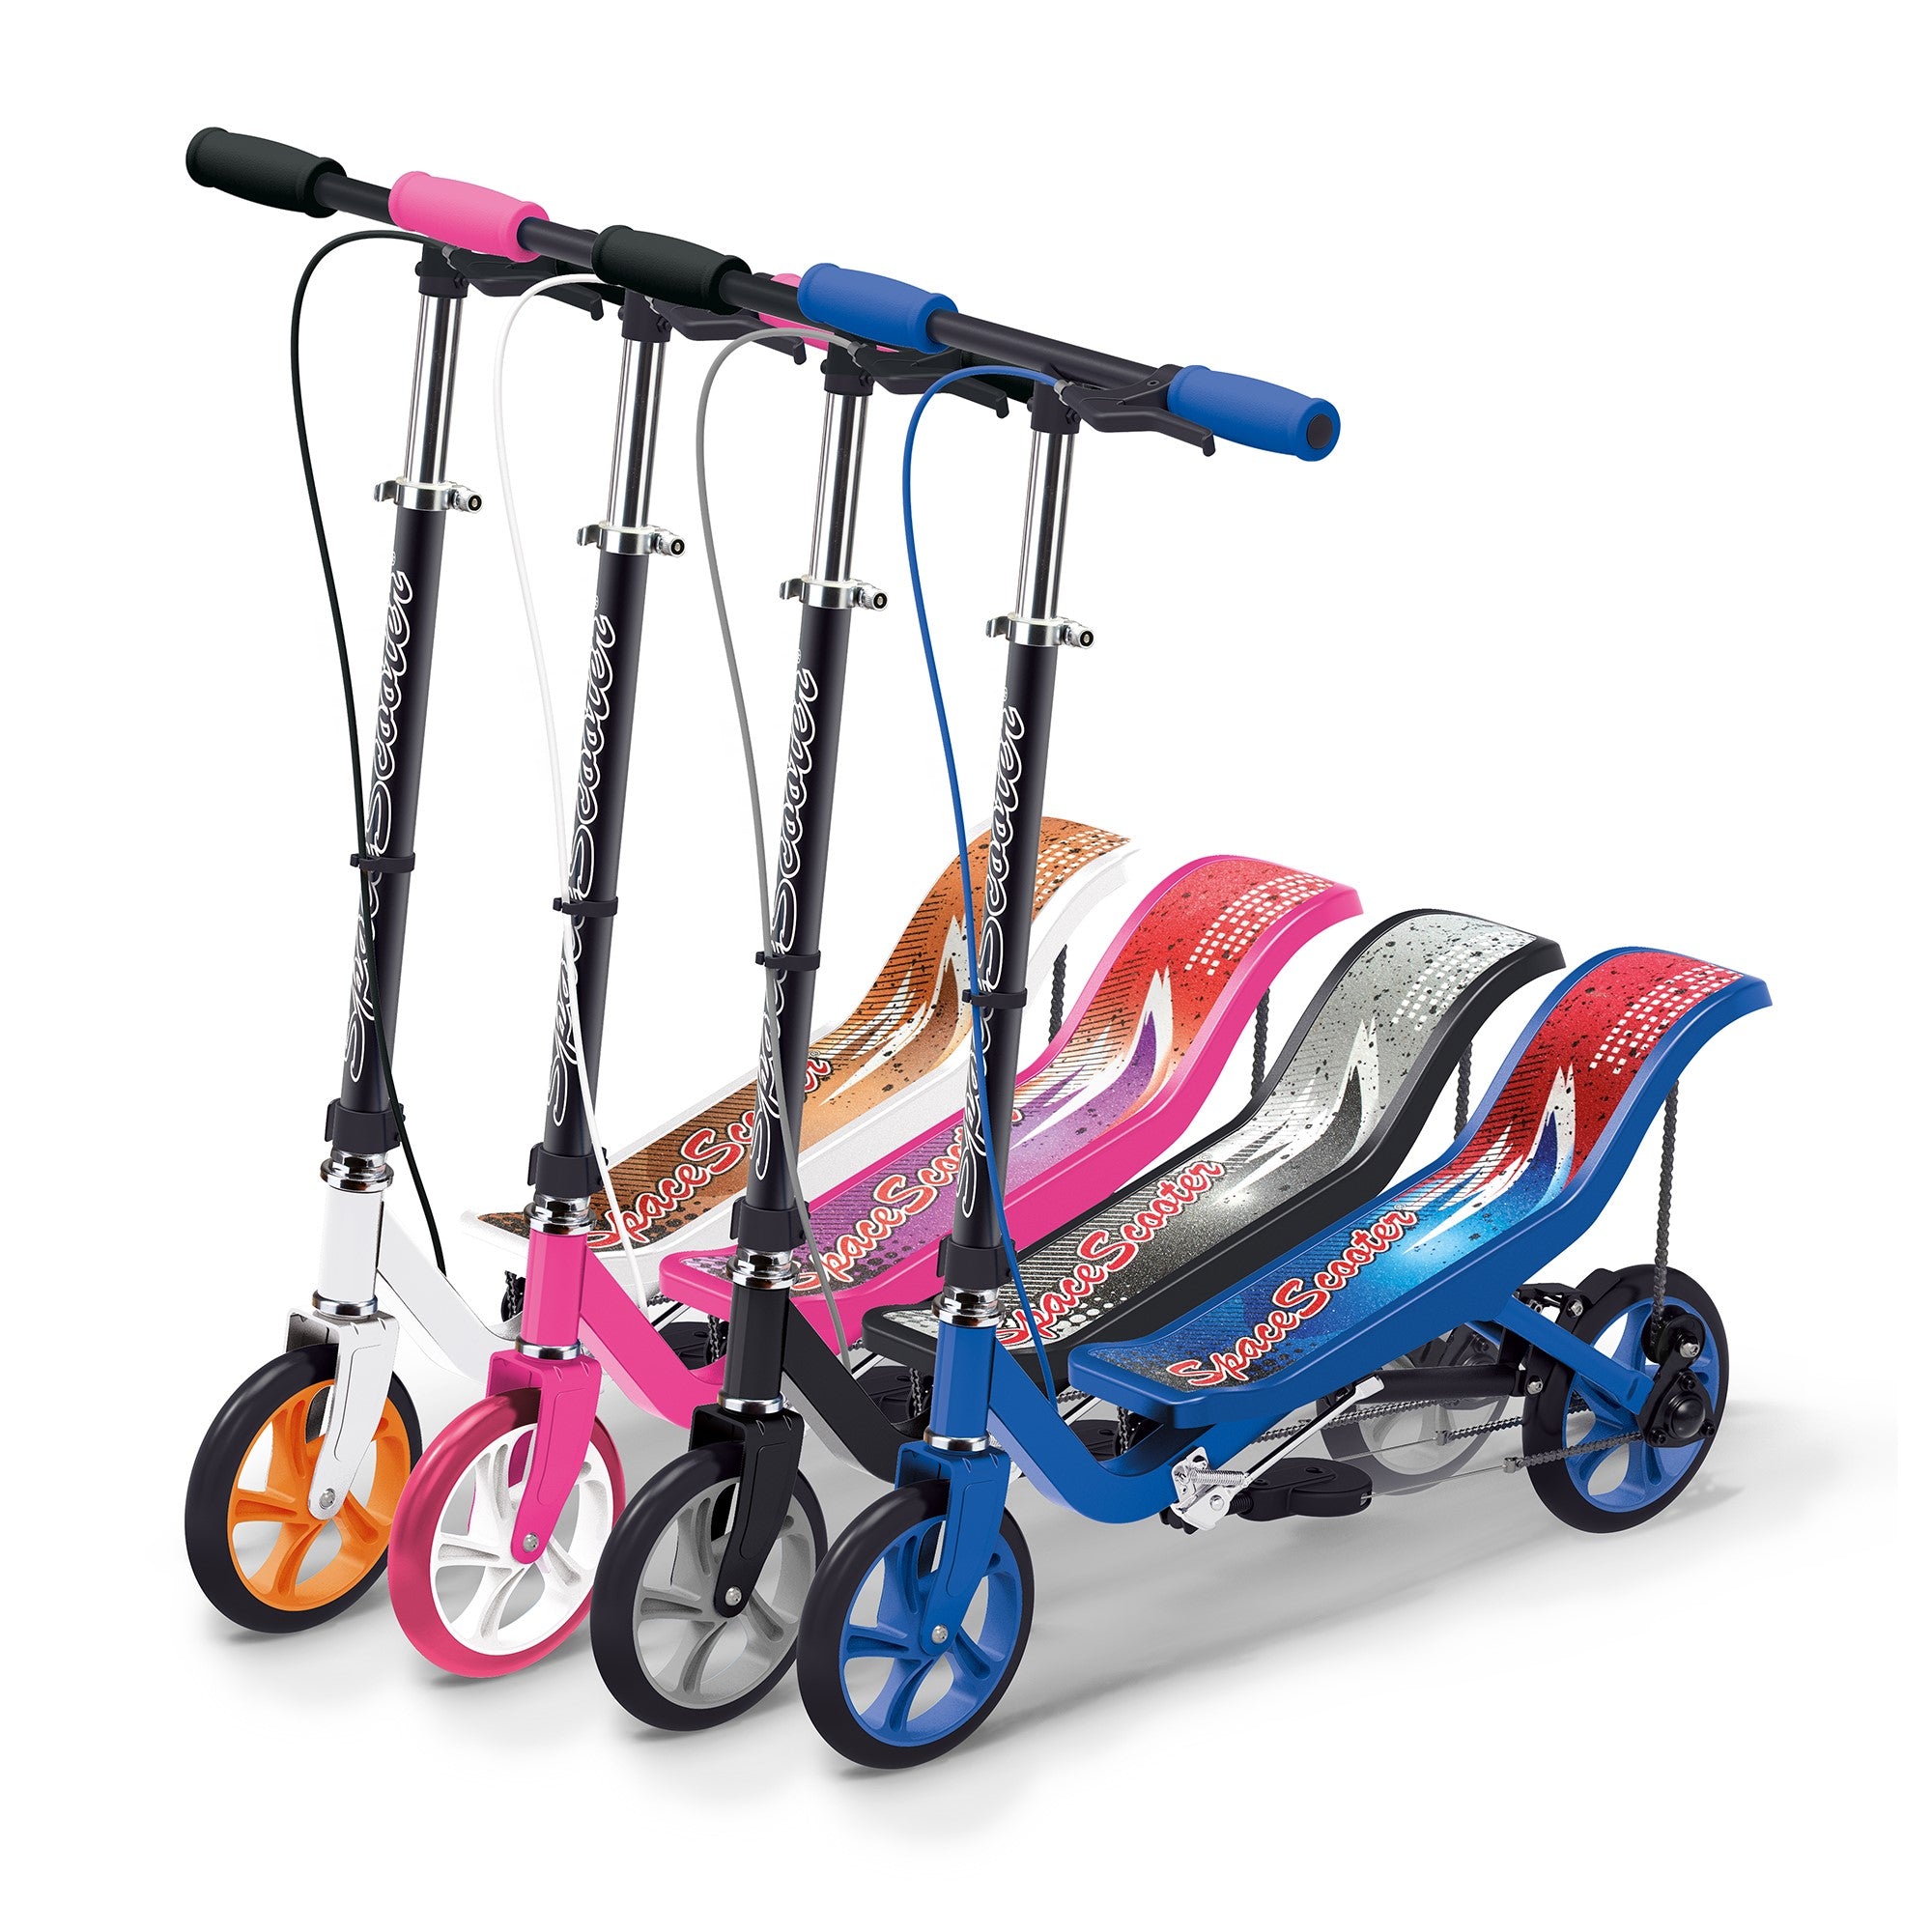 Space Scooter X560s Series